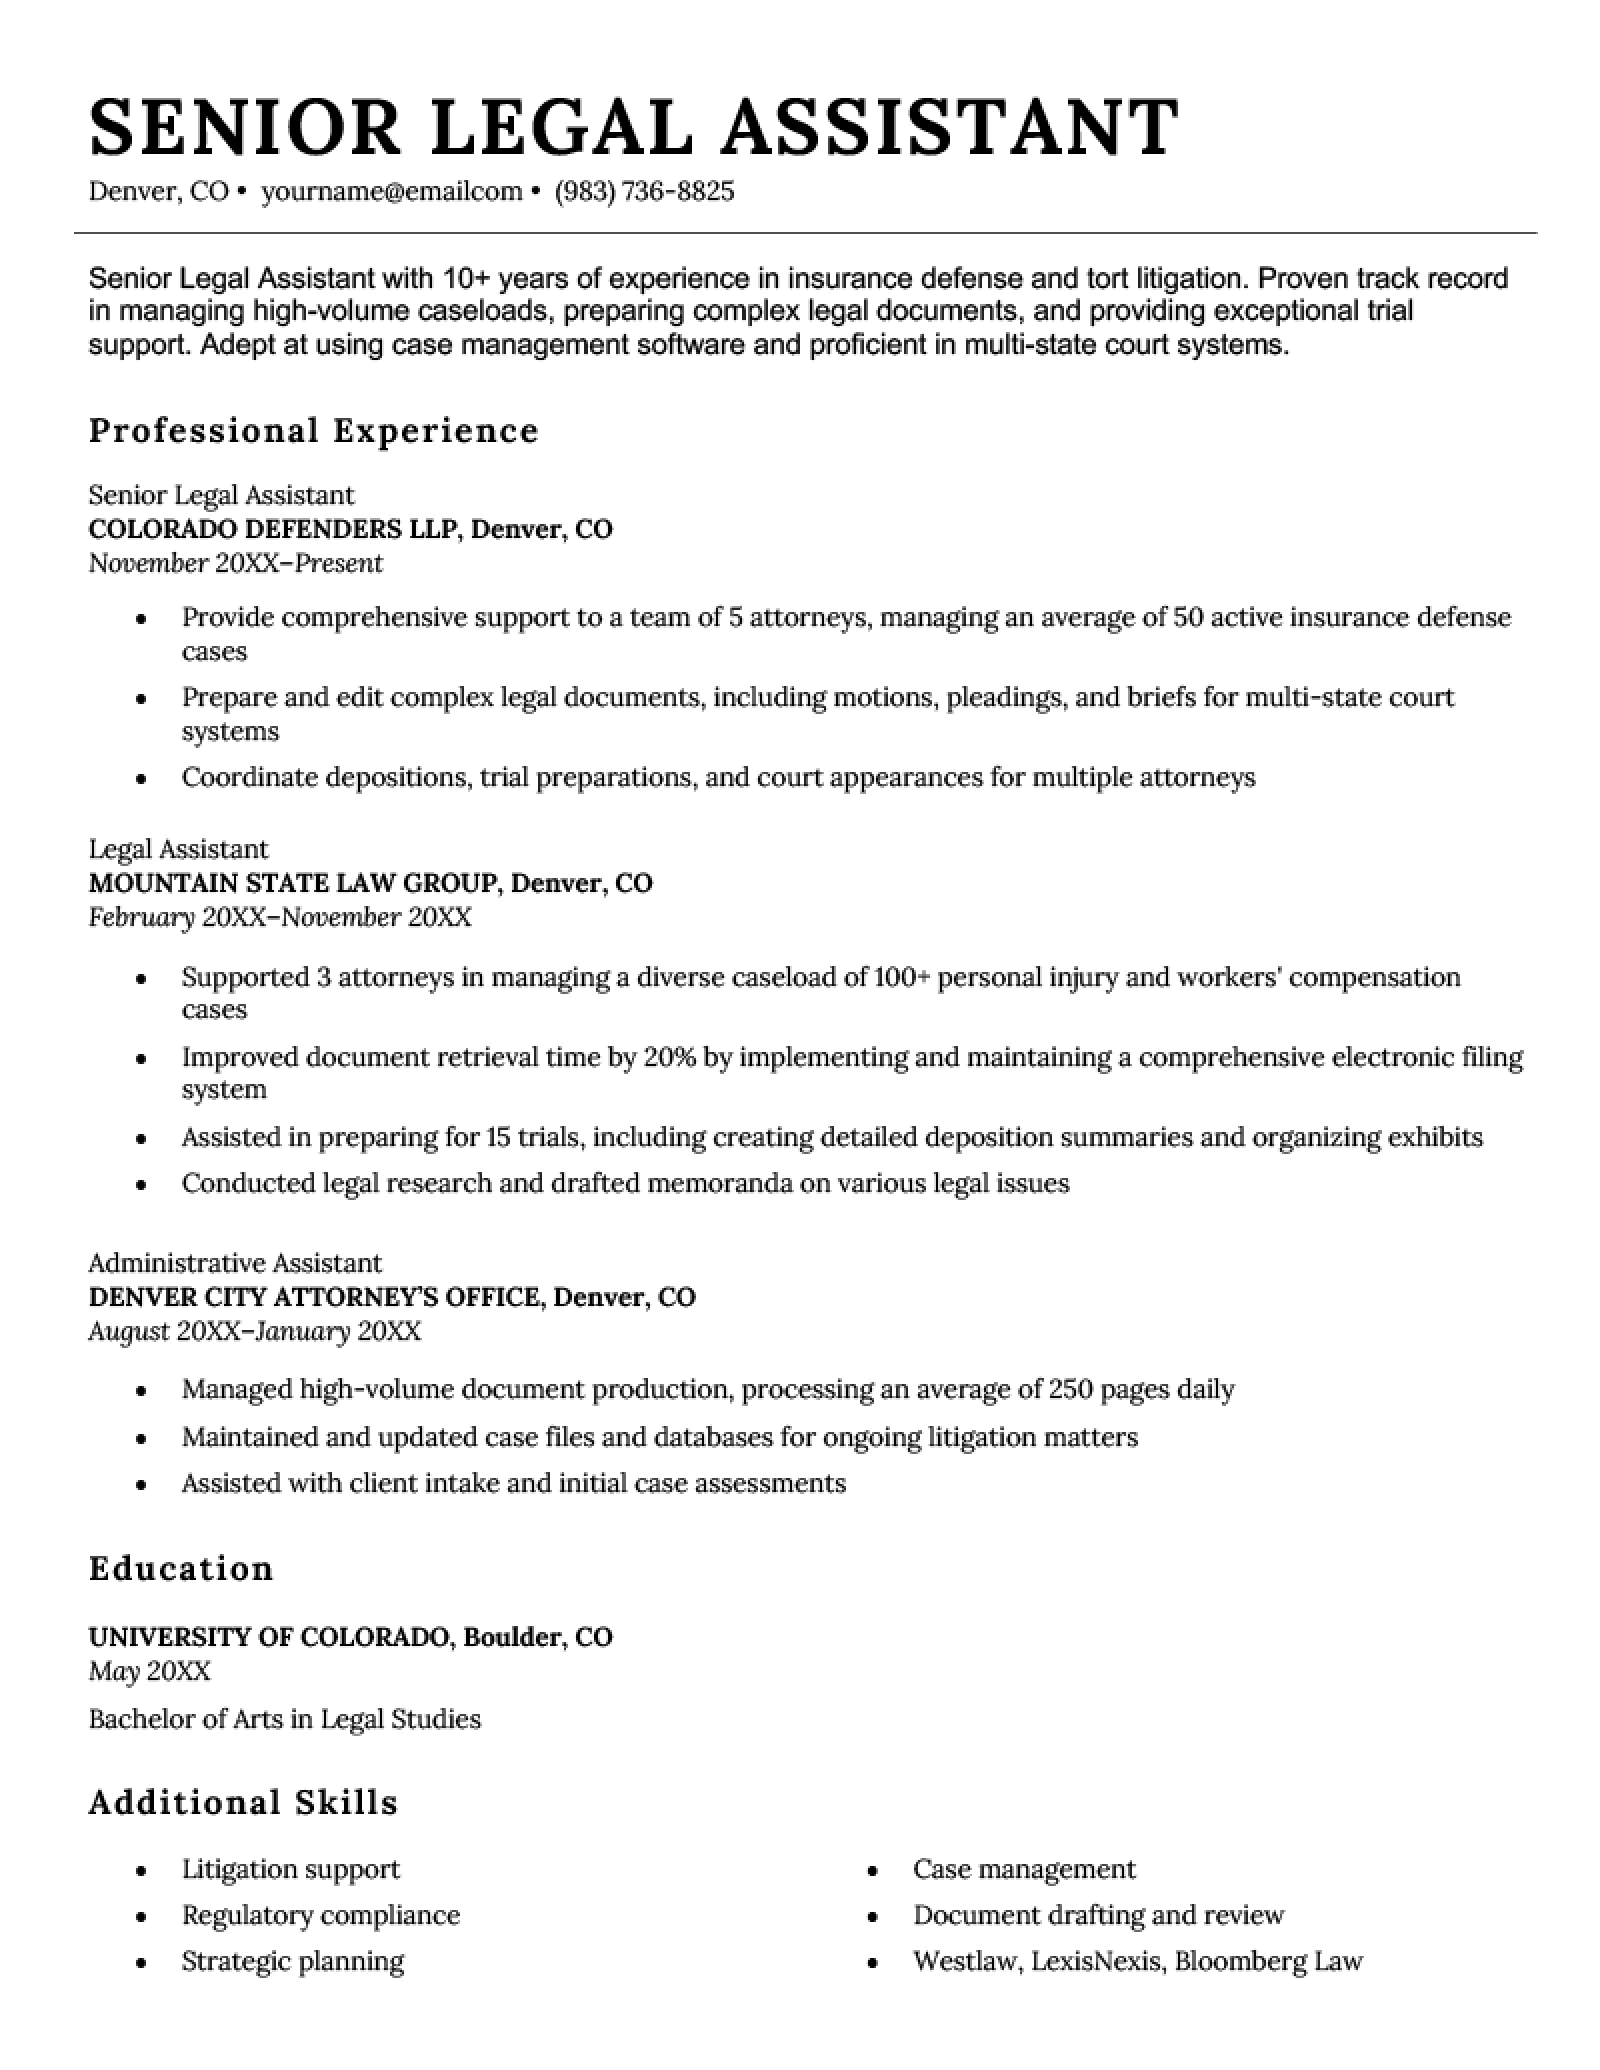 A senior legal assistant resume using a black and white template.